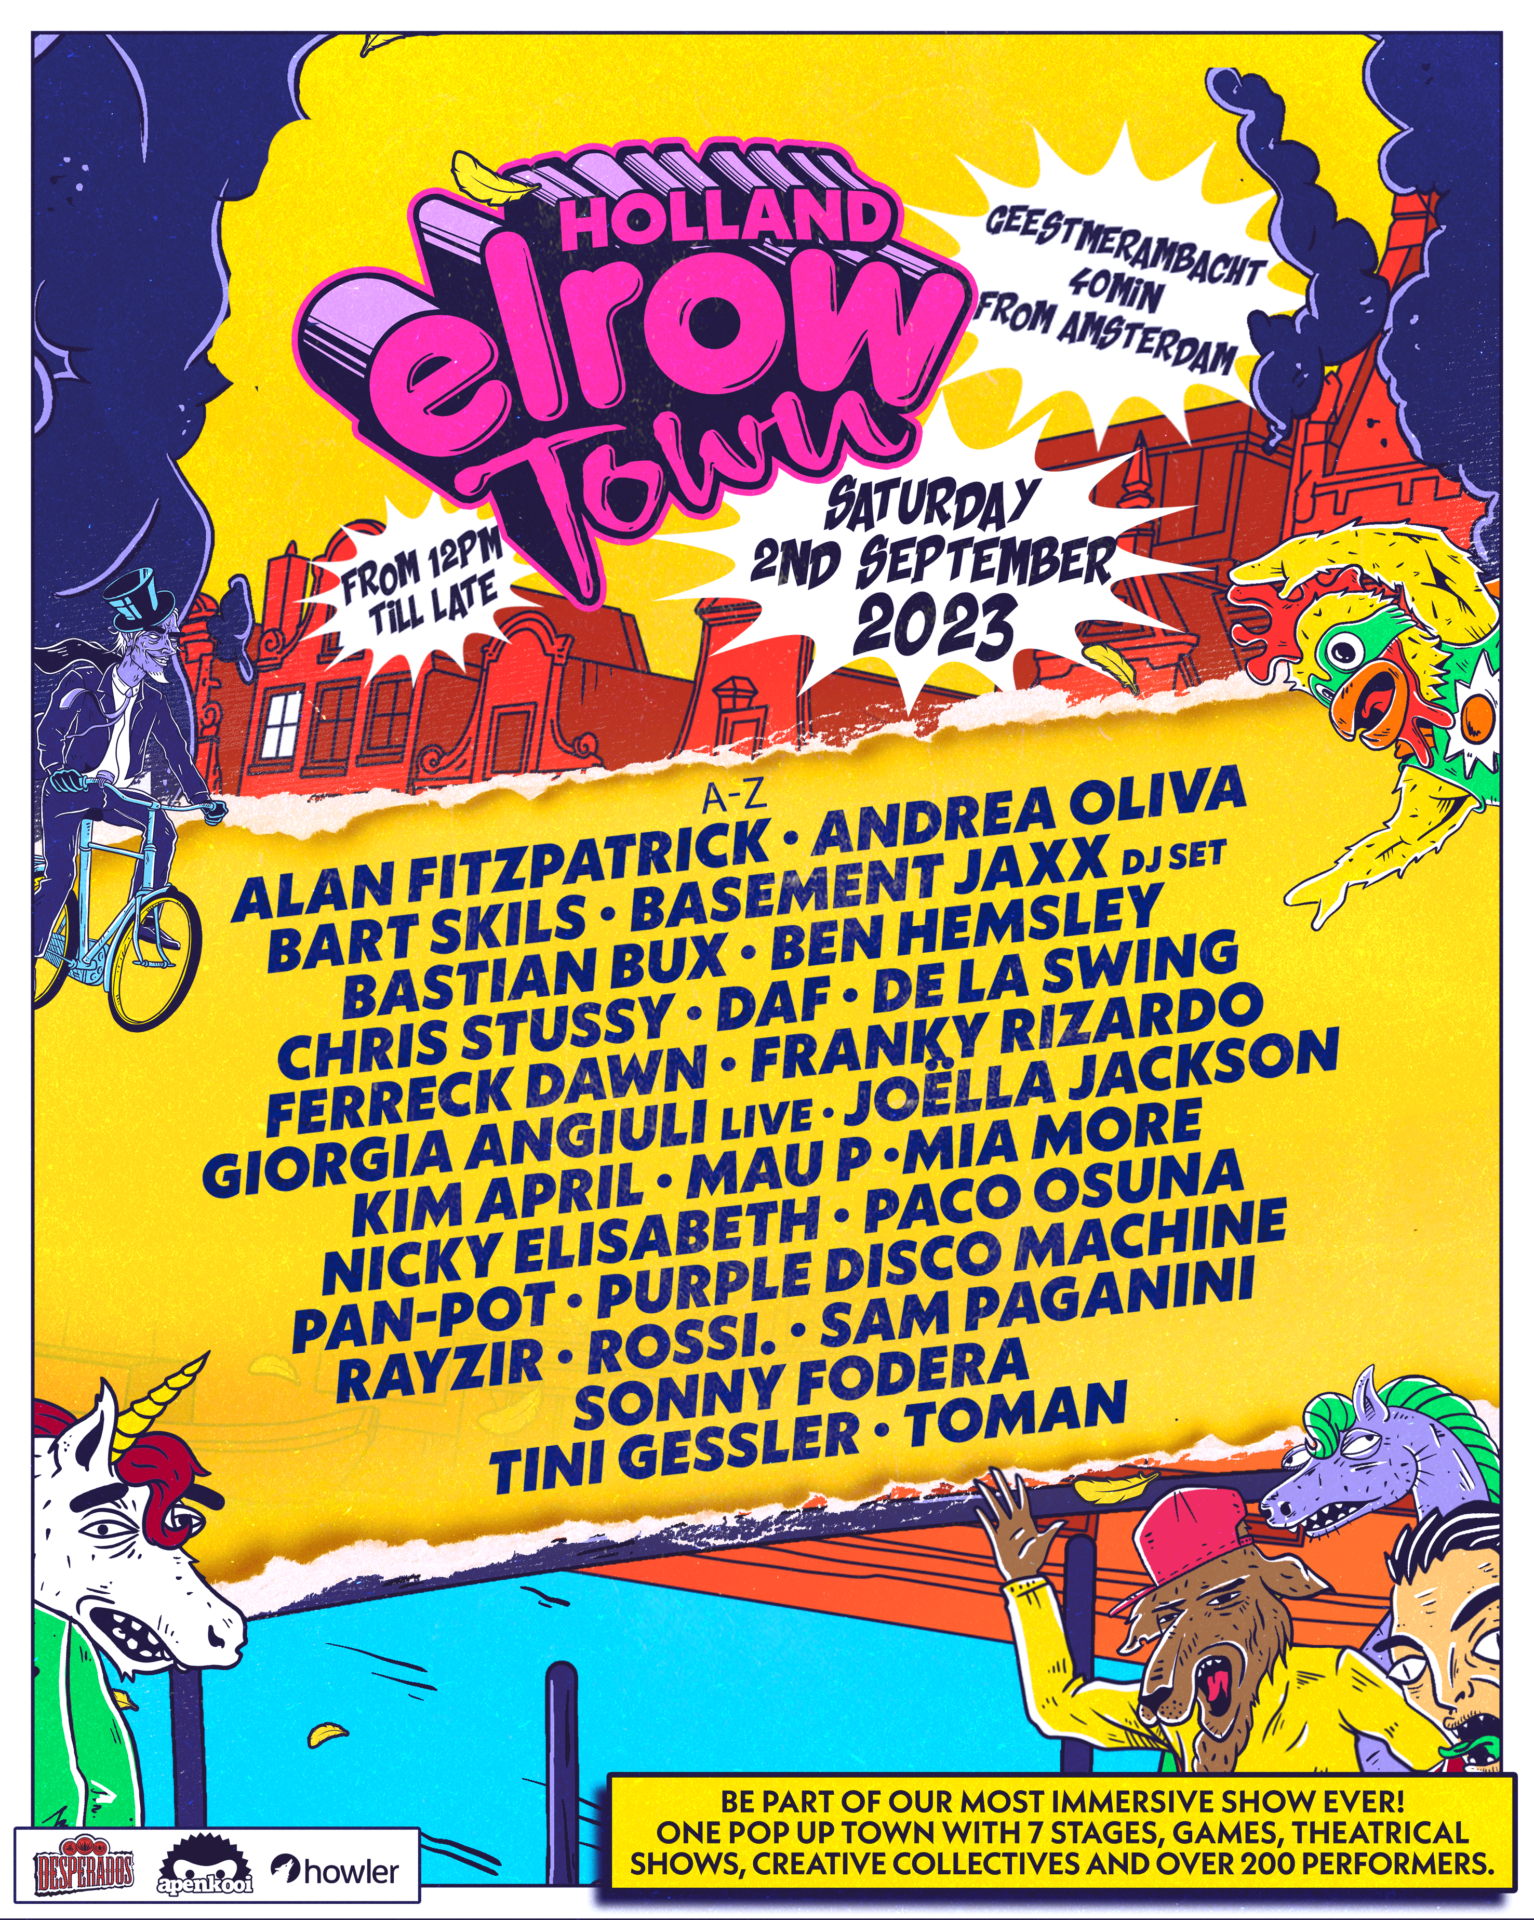 ELROW TOWN HOLLAND 2023: A Celebration of Music and Immersive Entertainment!